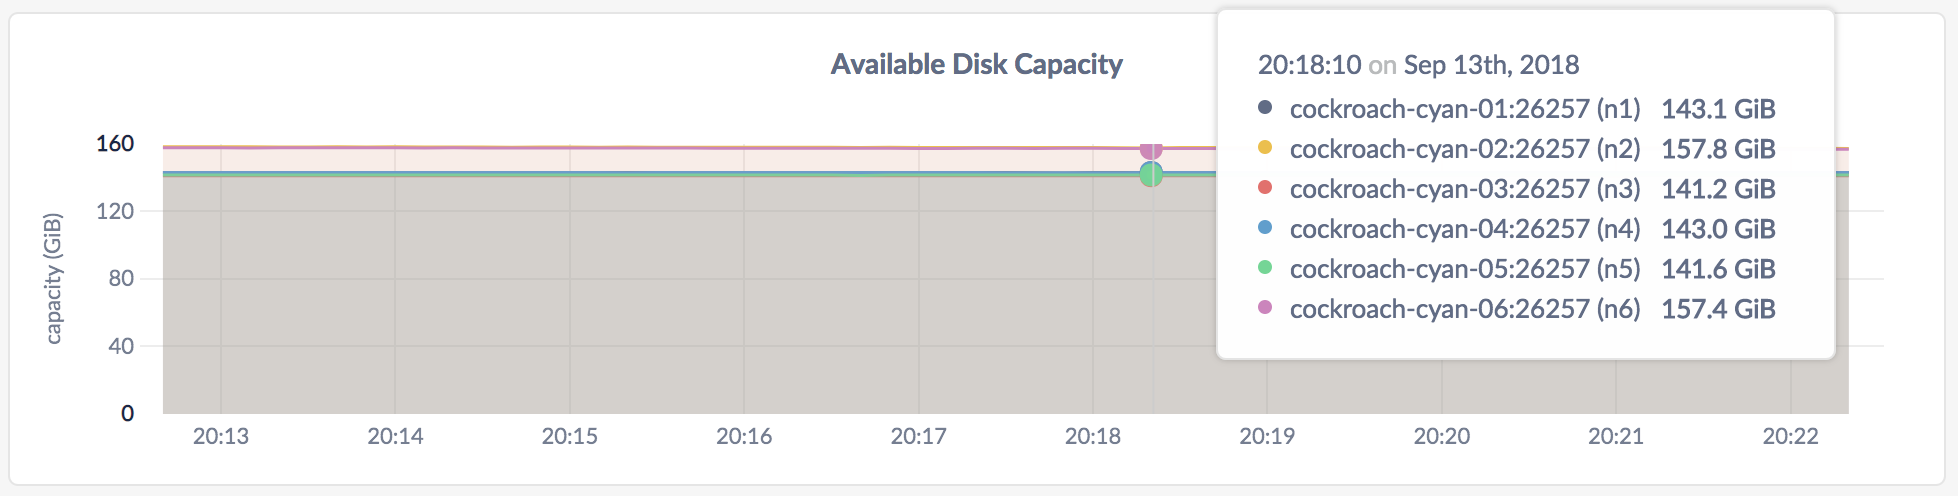 DB Console Disk Capacity graph